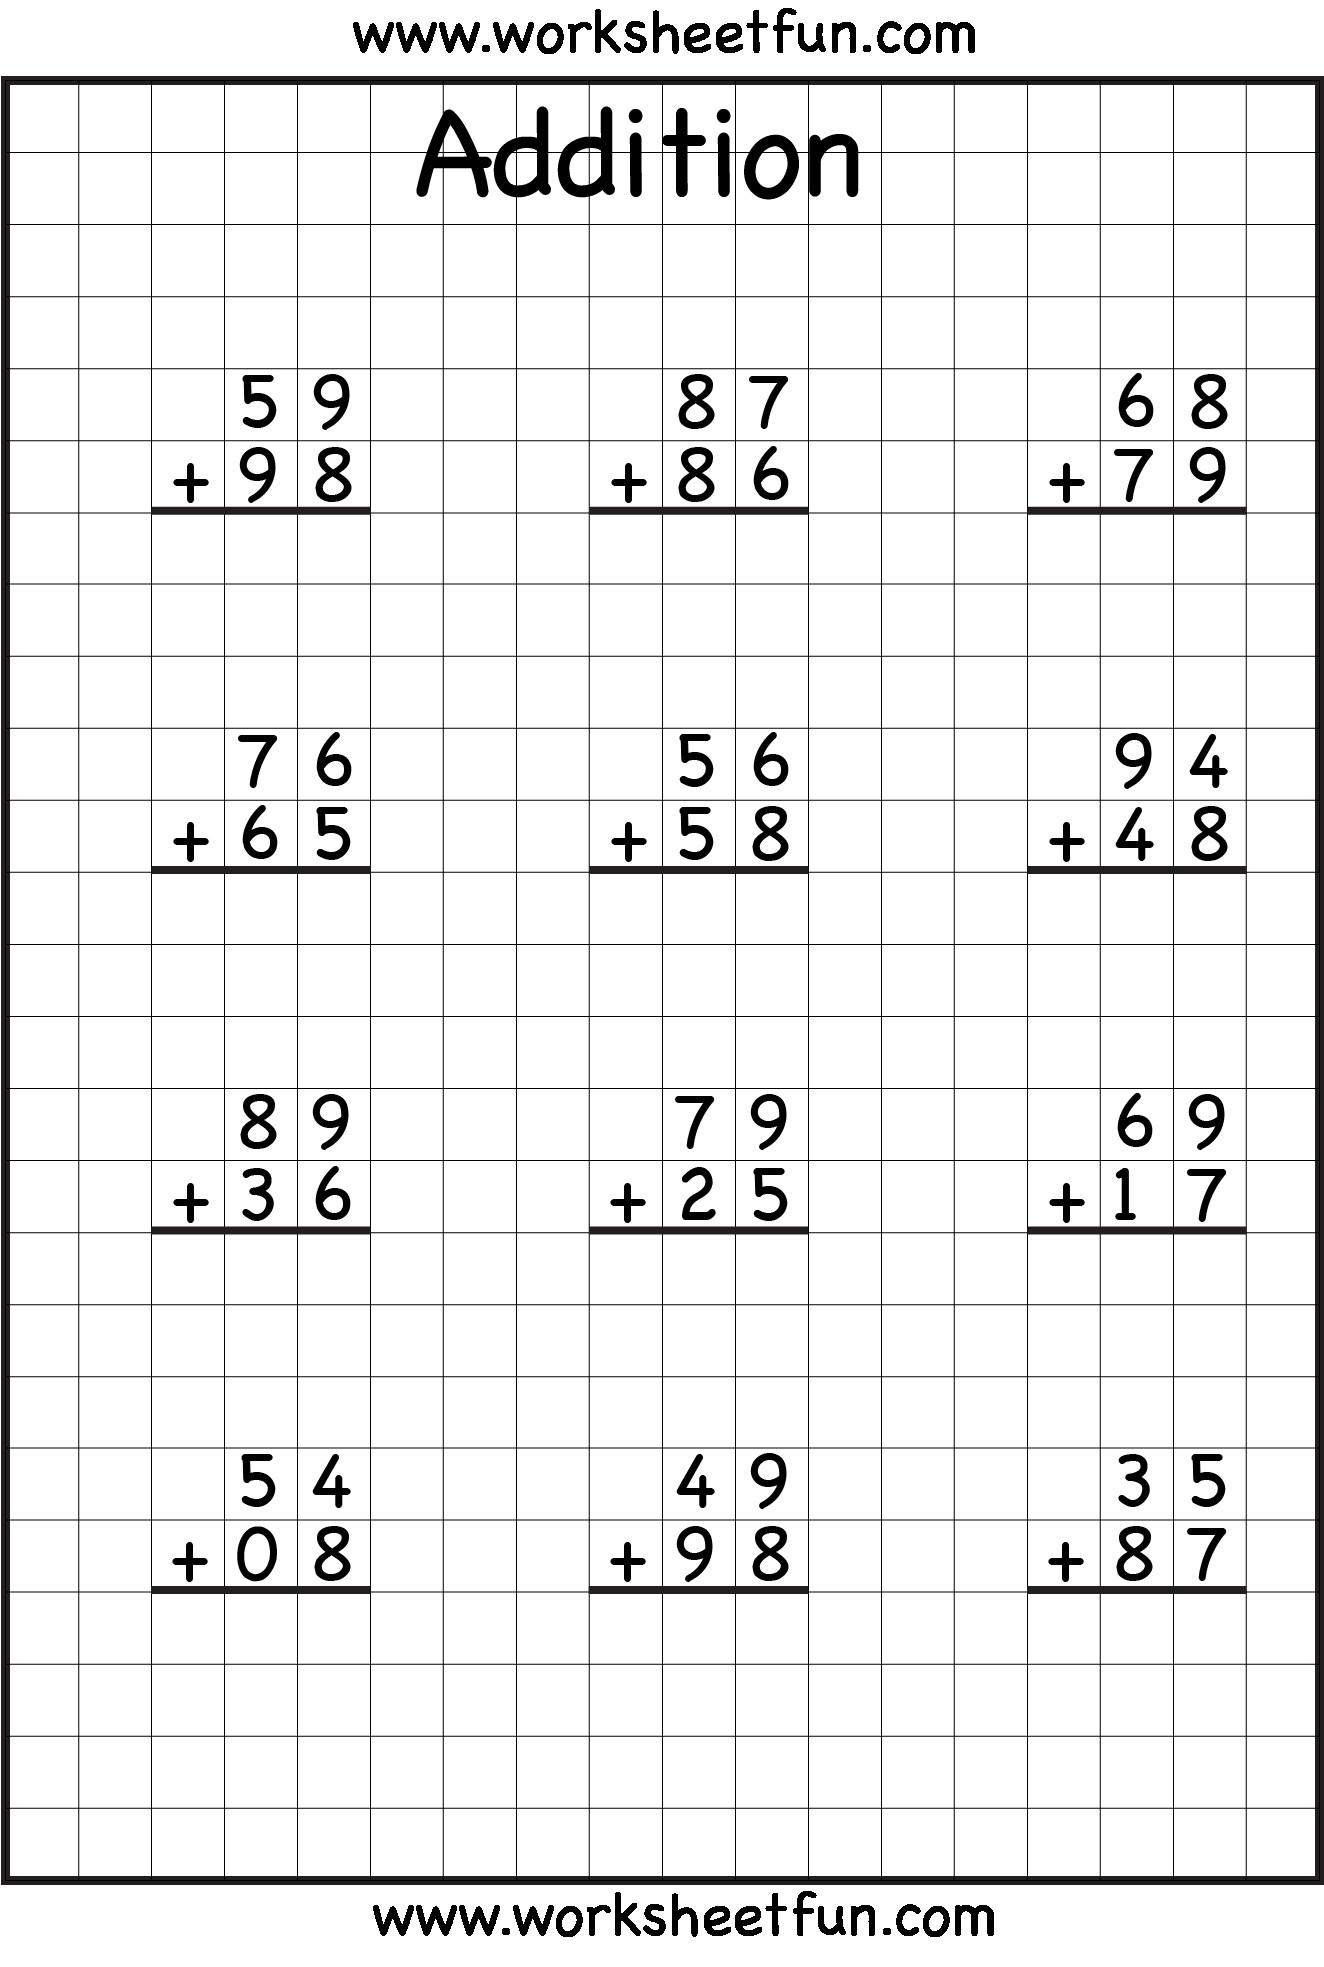 Free Math Worksheets Third Grade 3 Addition Add 4 Digit Numbers In Columns